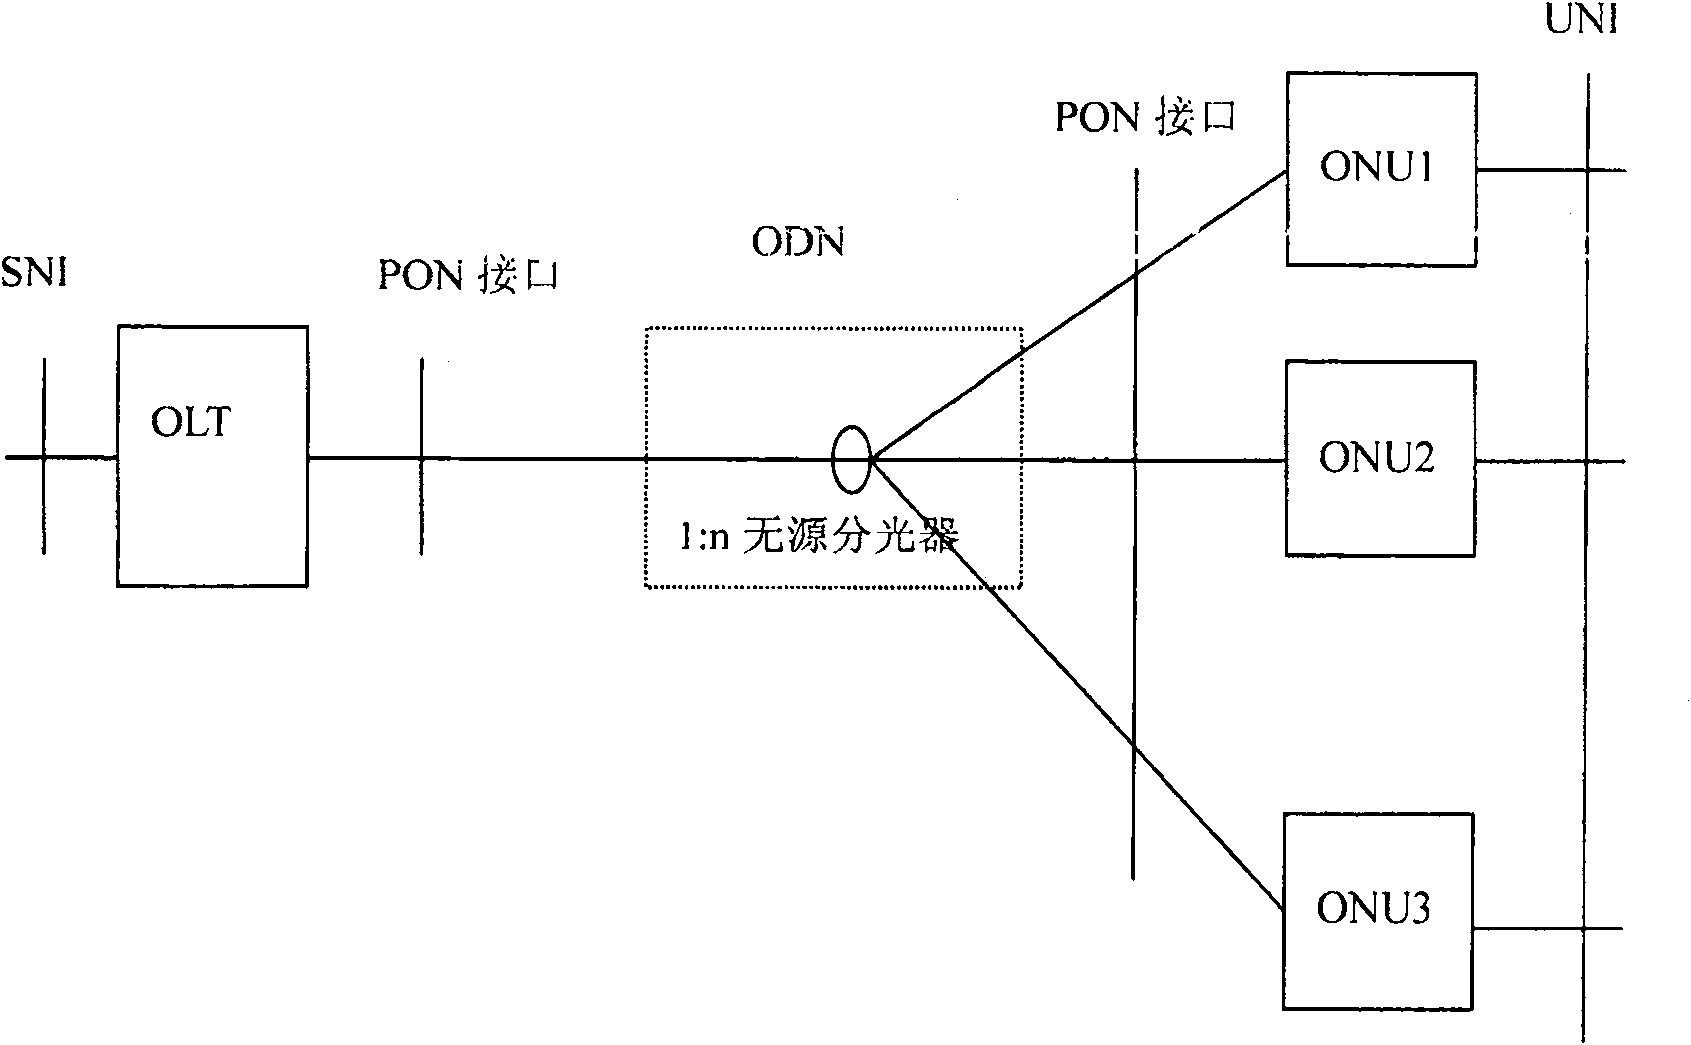 Method for implementing intra-band management in ethernet passive optical network